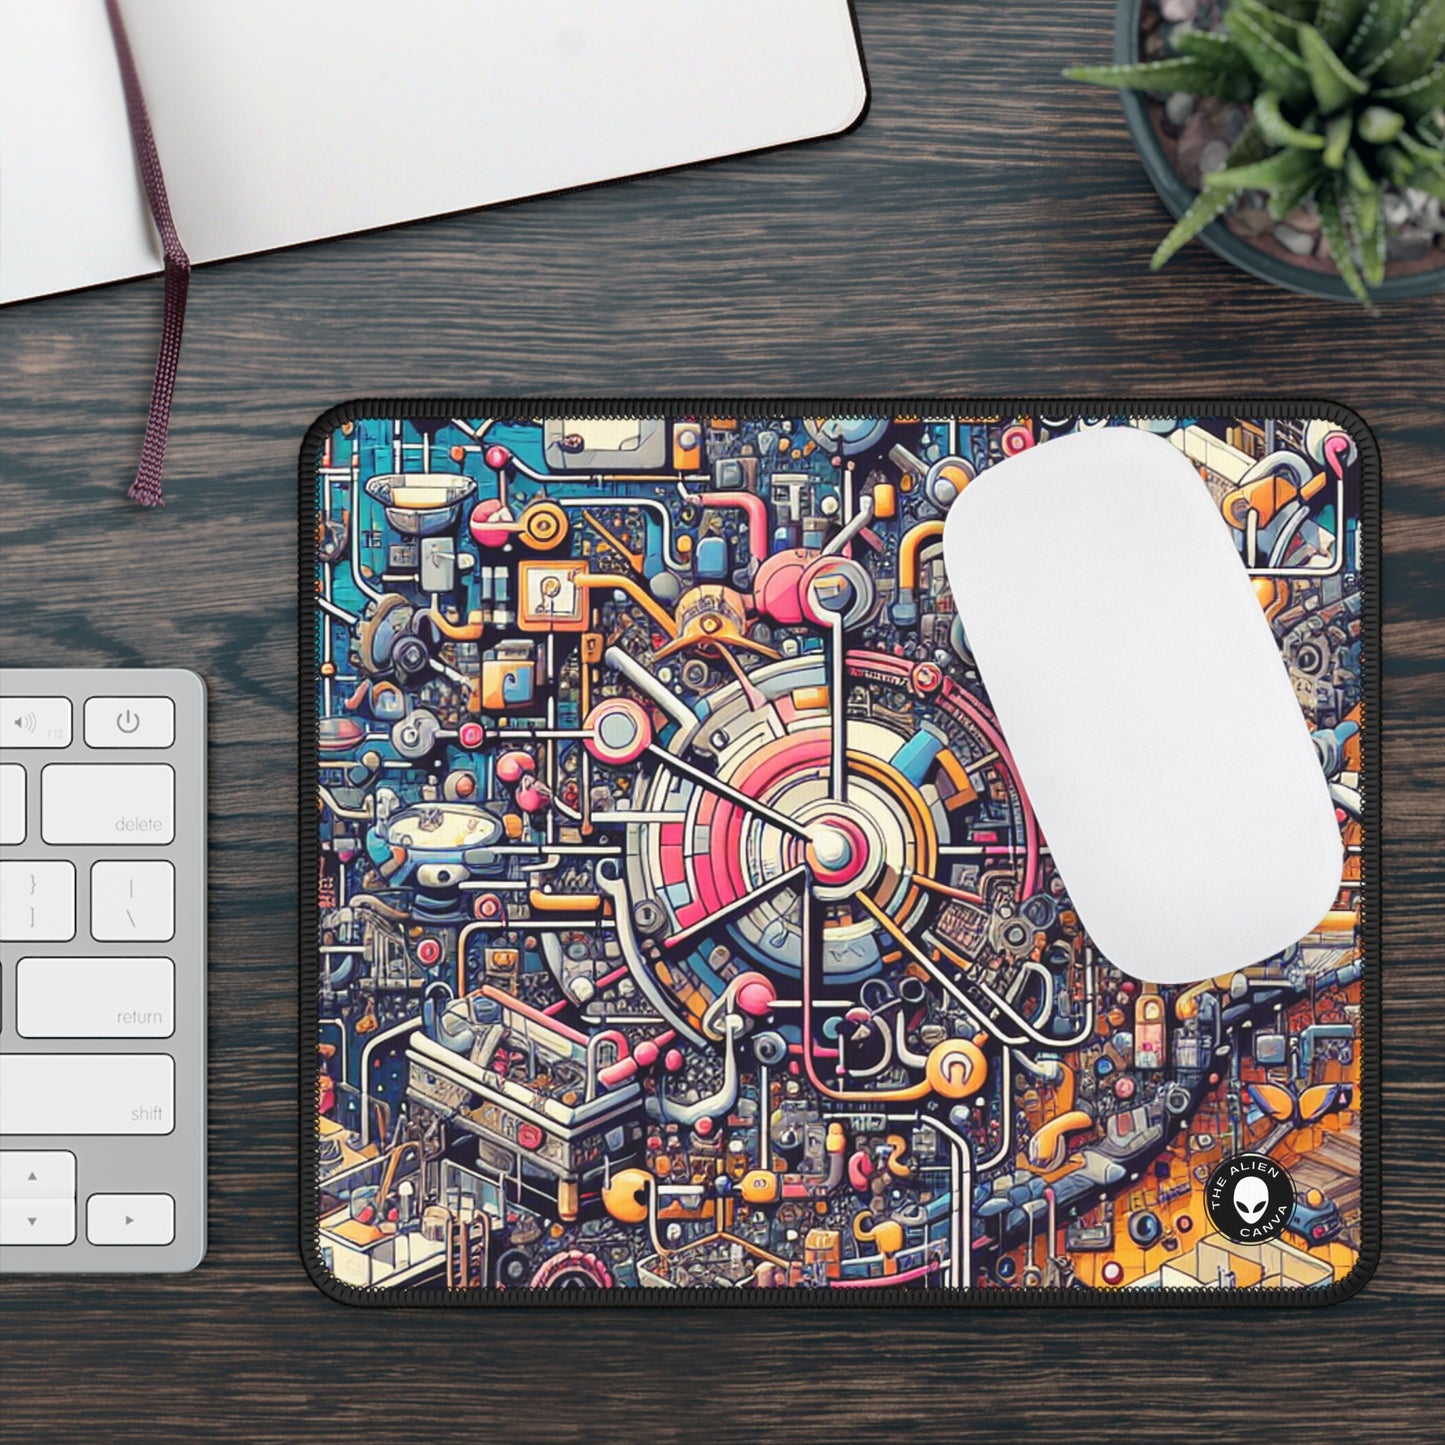 "Connection Points: Exploring Human Interactions in Public Spaces" - The Alien Gaming Mouse Pad Relational Art